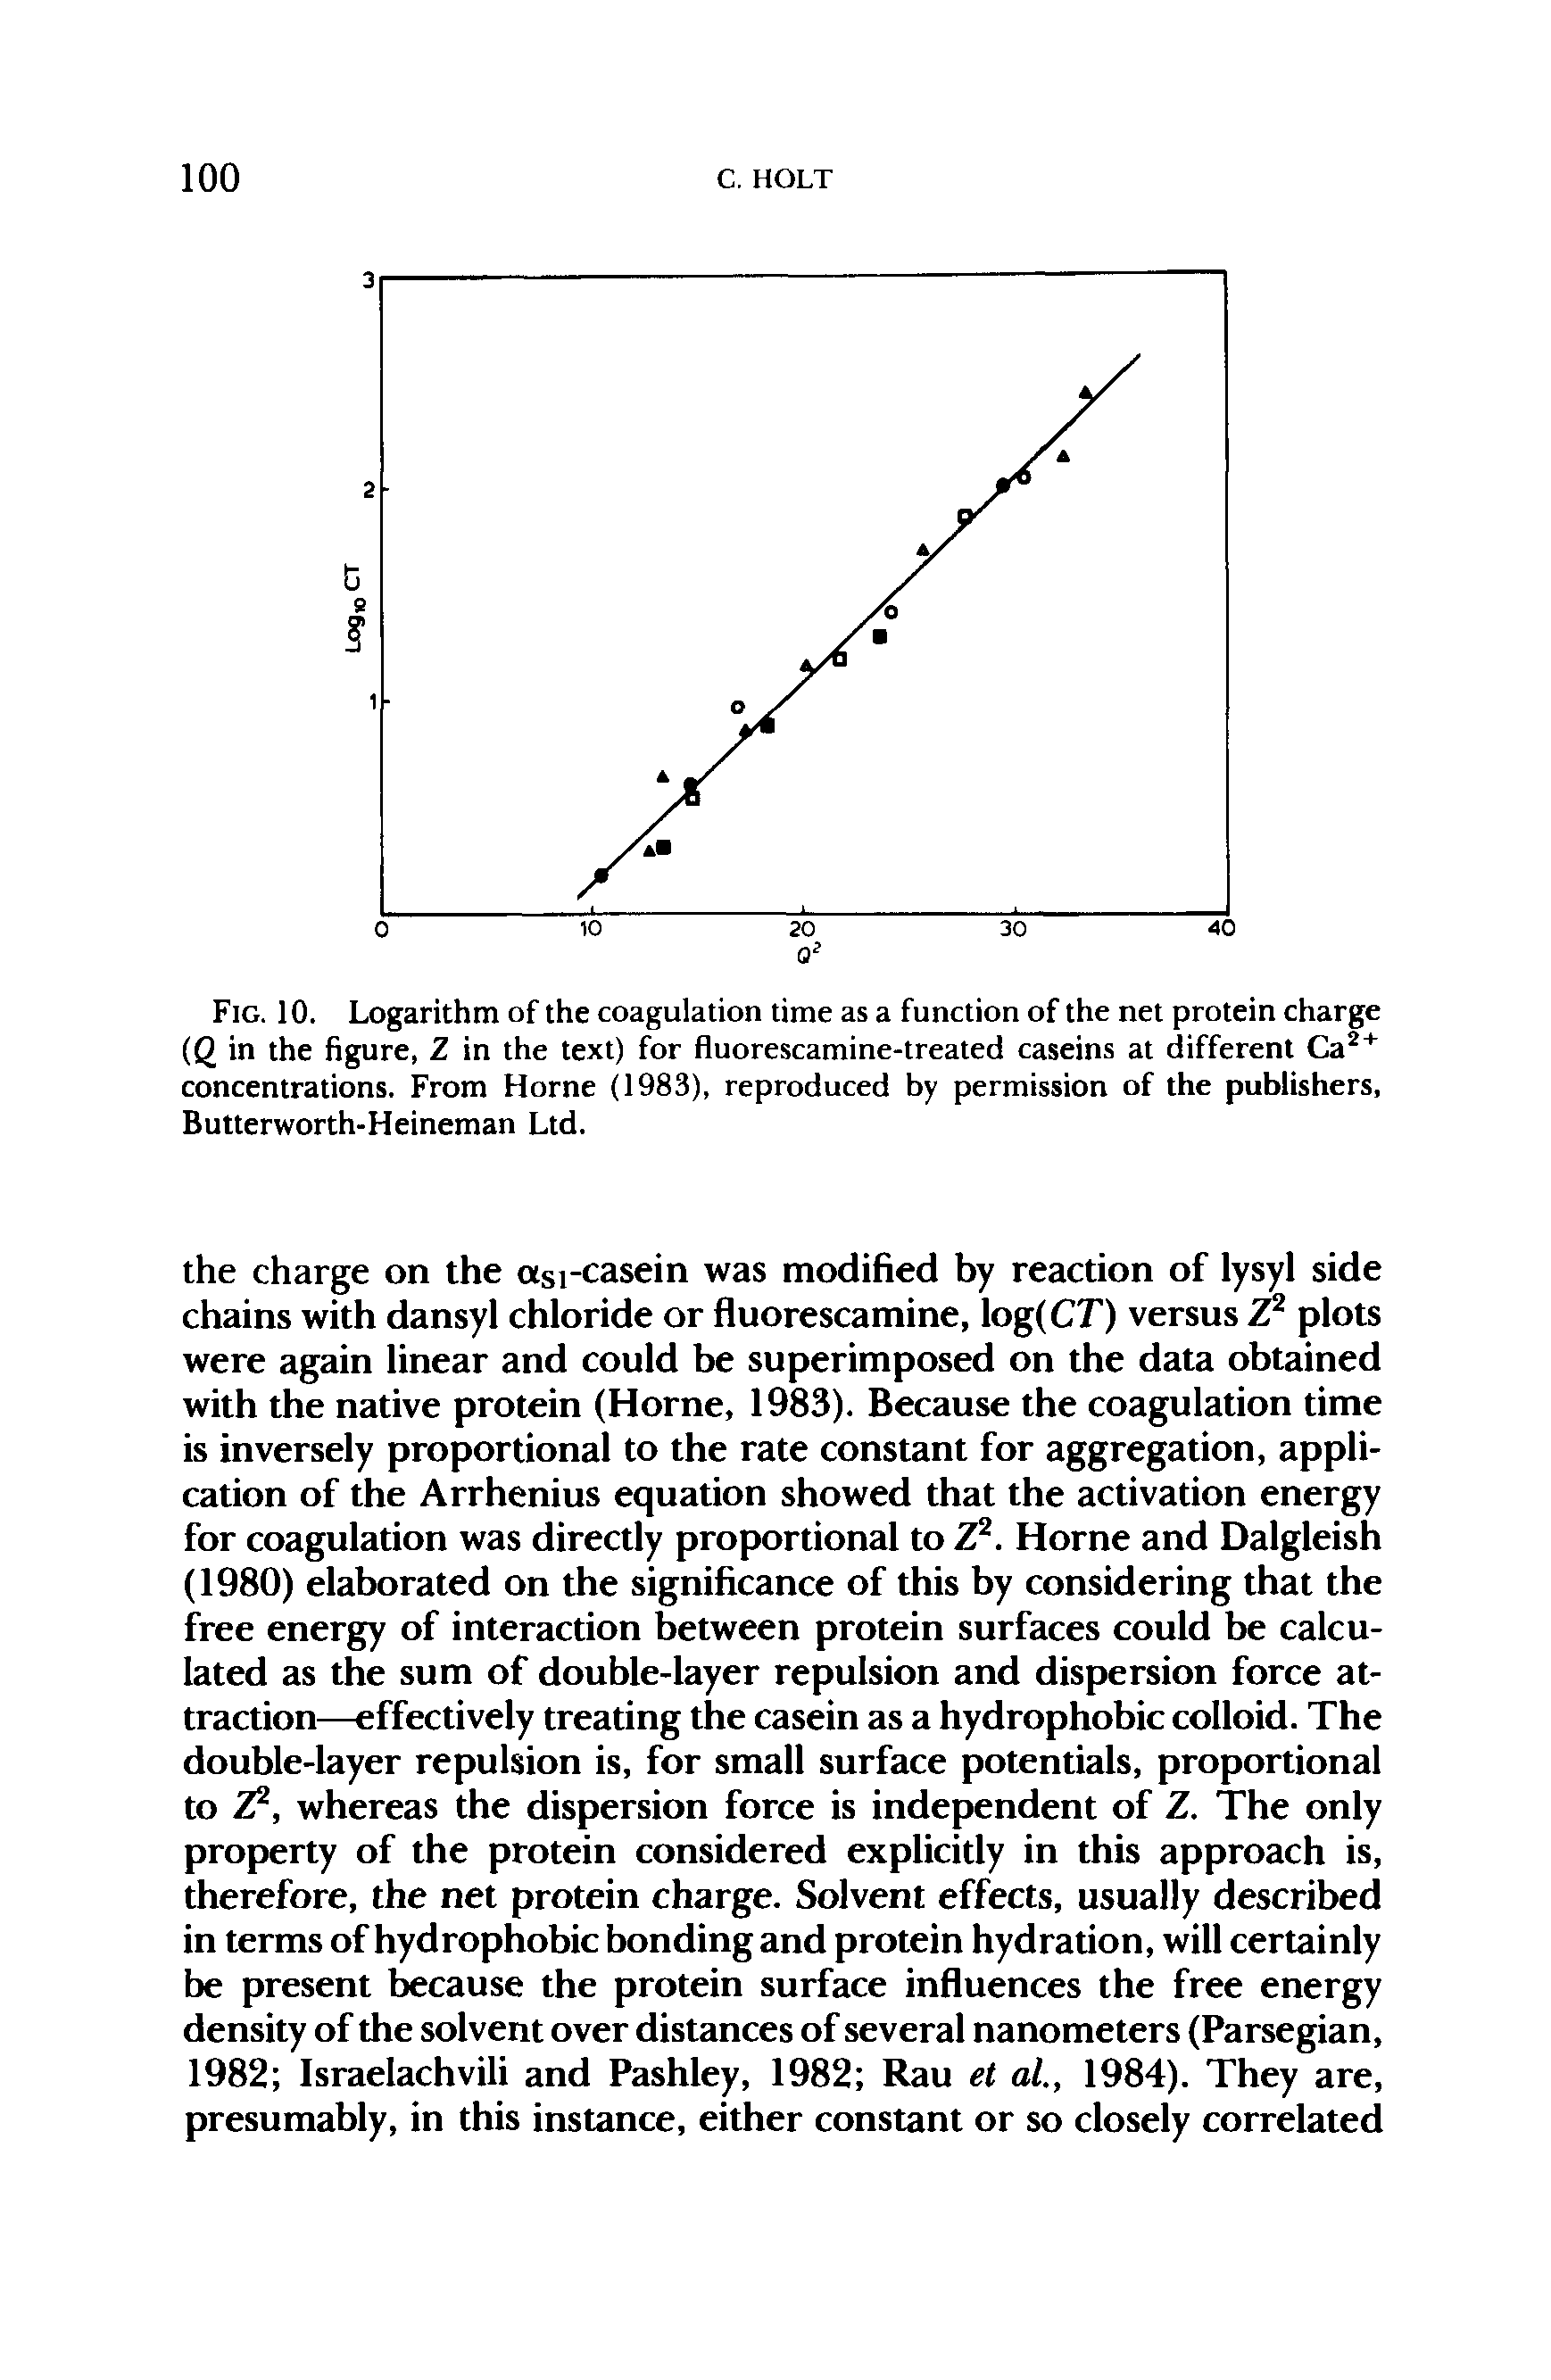 Fig. 10. Logarithm of the coagulation time as a function of the net protein charge (Q in the figure, Z in the text) for fluorescamine-treated caseins at different Ca2+ concentrations. From Horne (1983), reproduced by permission of the publishers, Butterworth-Heineman Ltd.